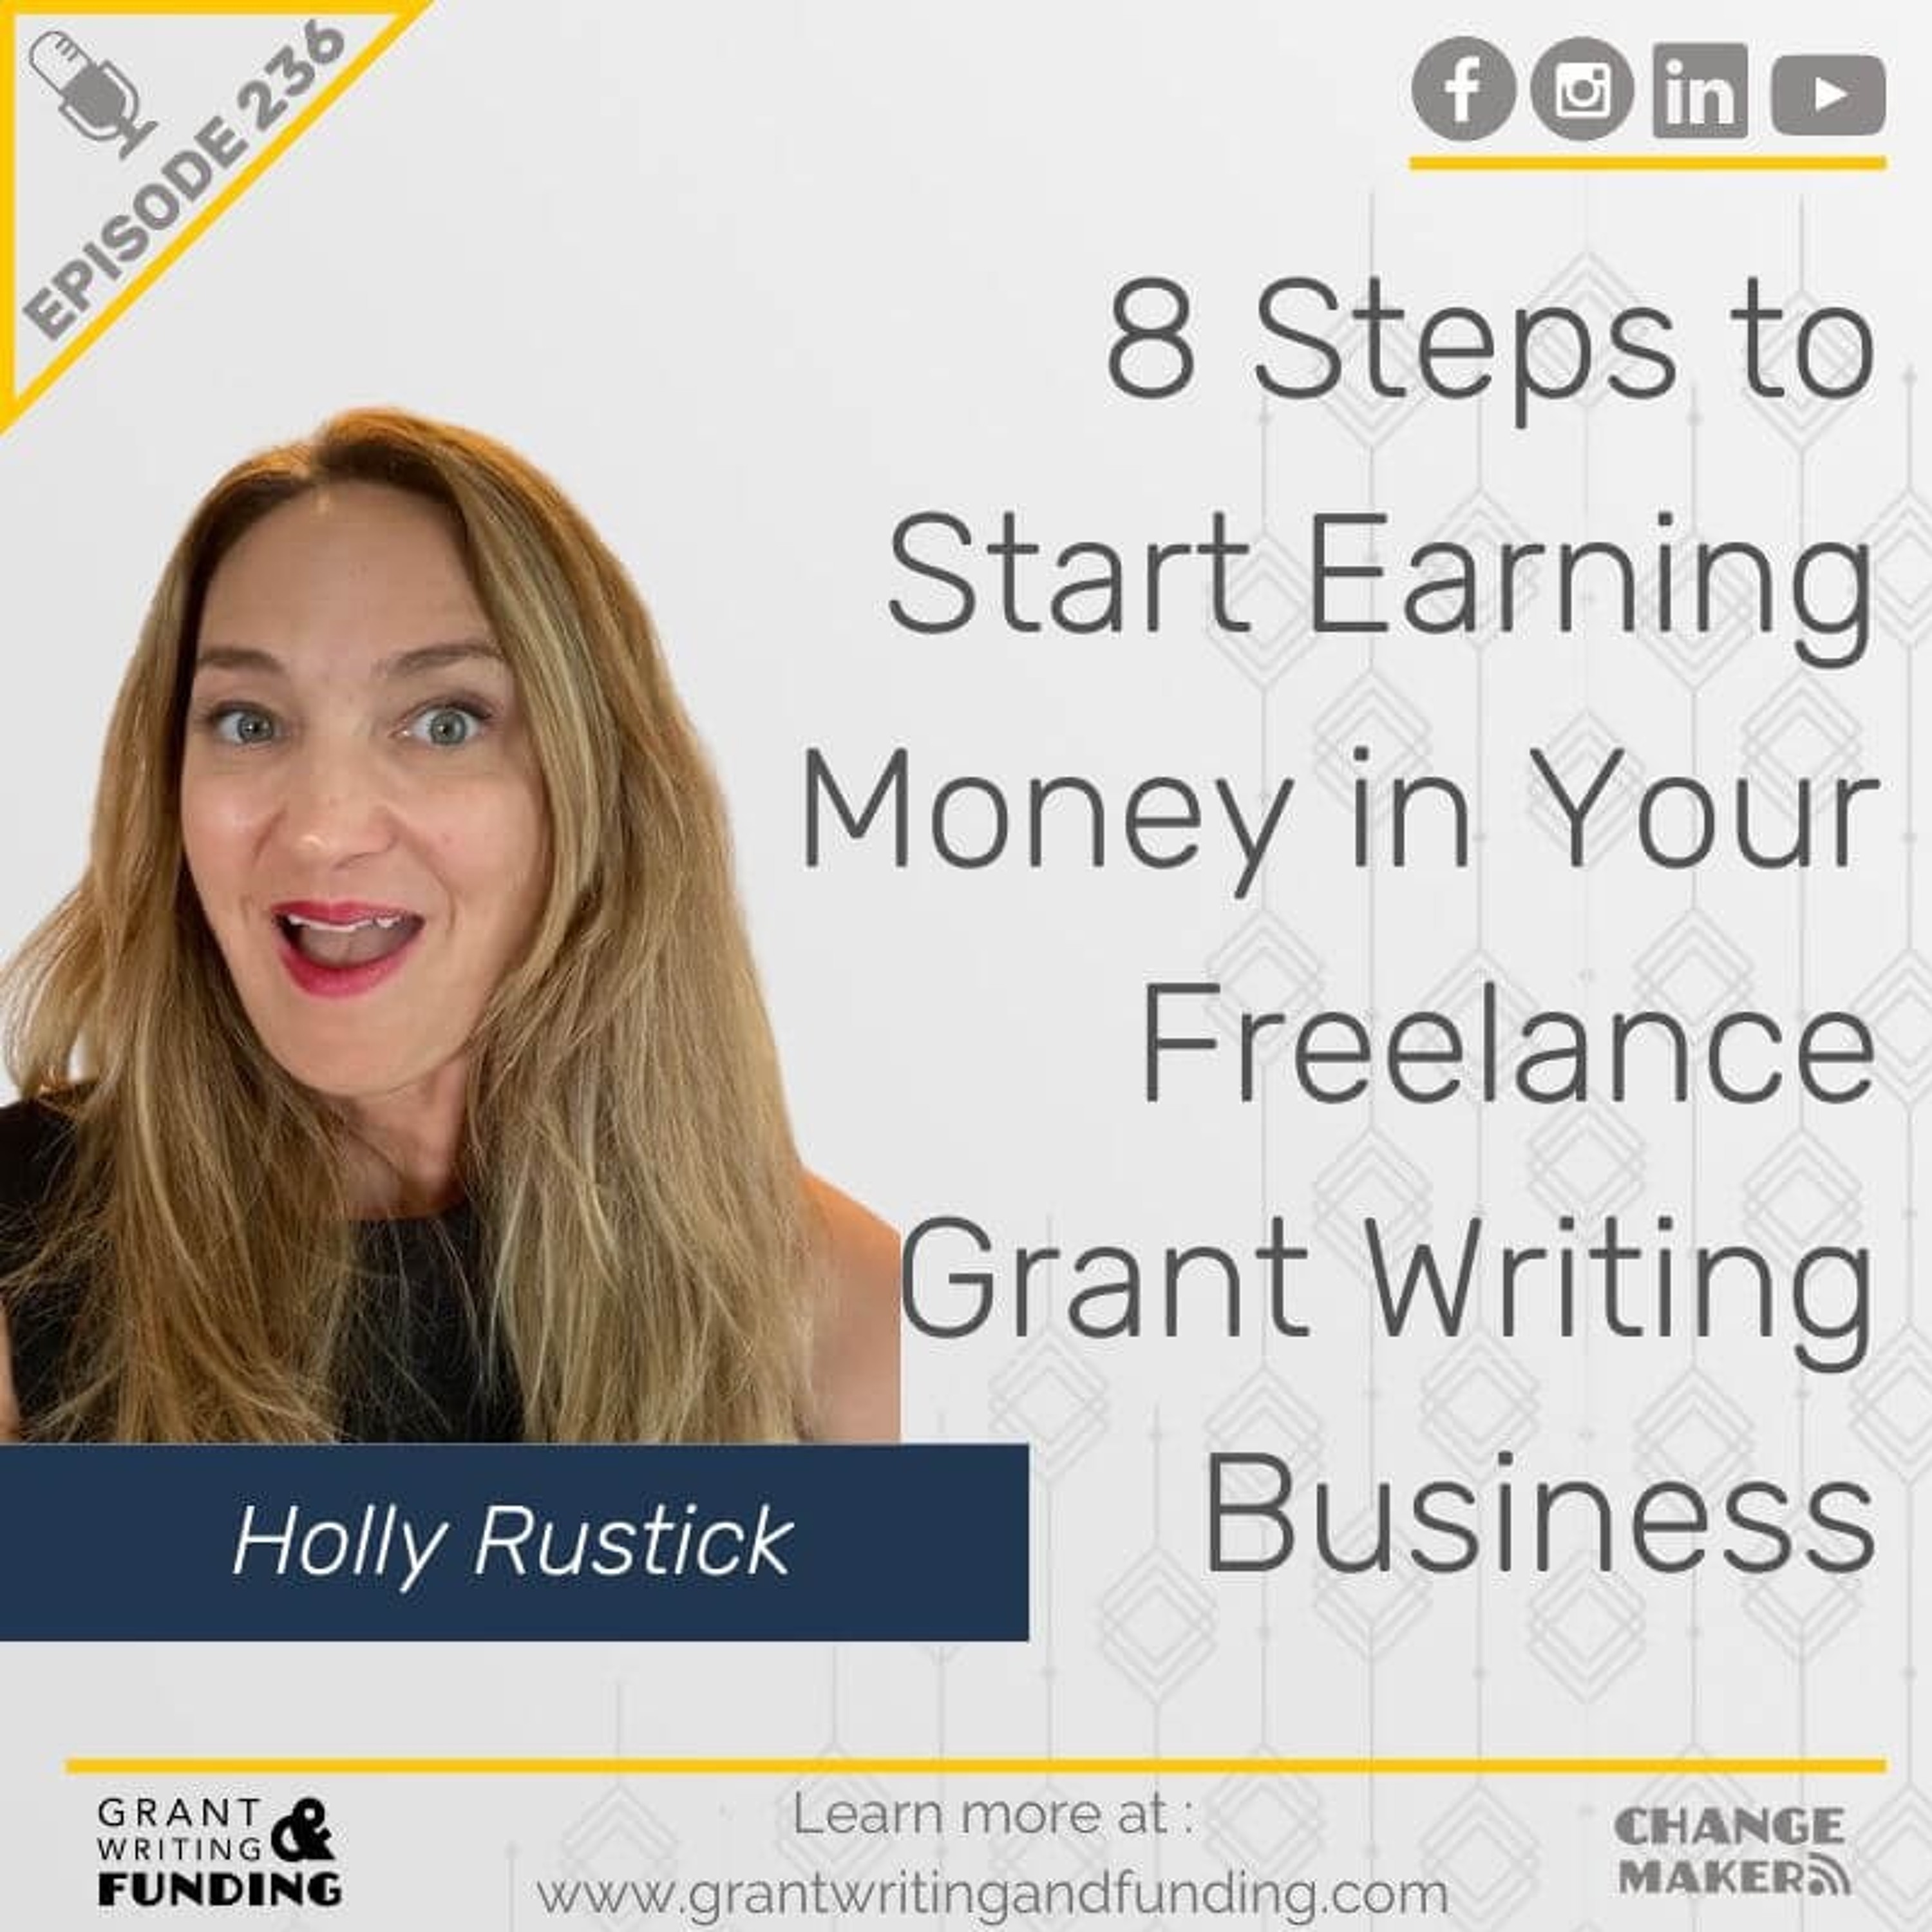 Ep.236: 8 Steps to Start Earning Money in Your Freelance Grant Writing Business